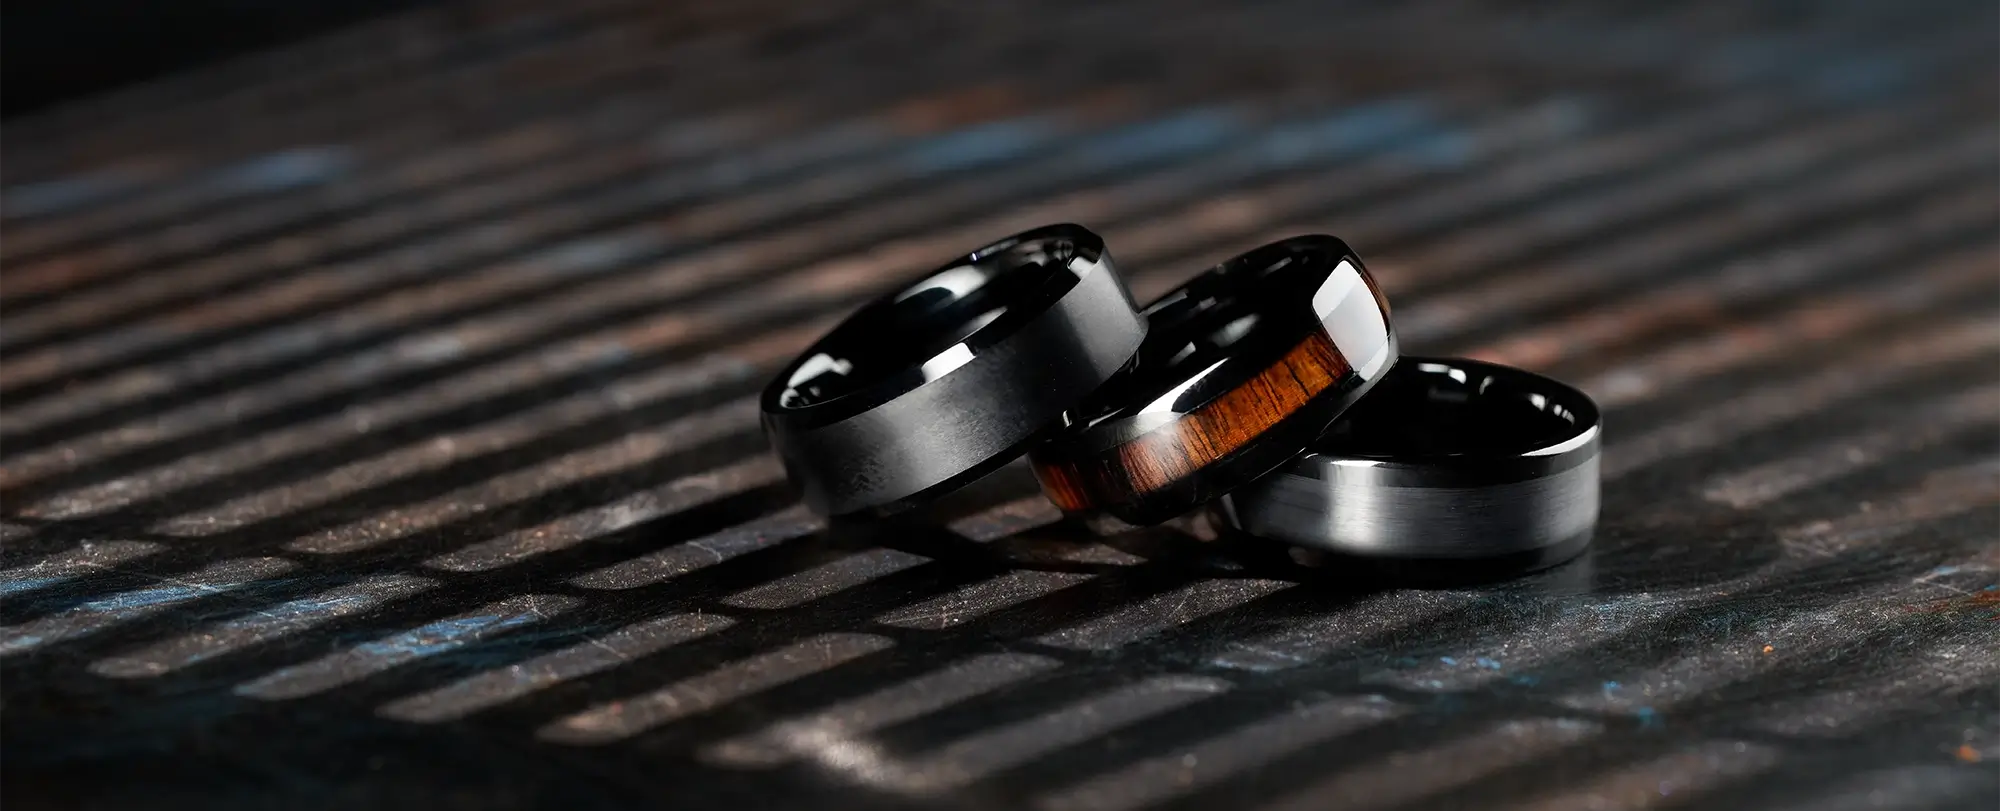 The Best Cheap Wedding Rings For Men - The Thrifty Bride